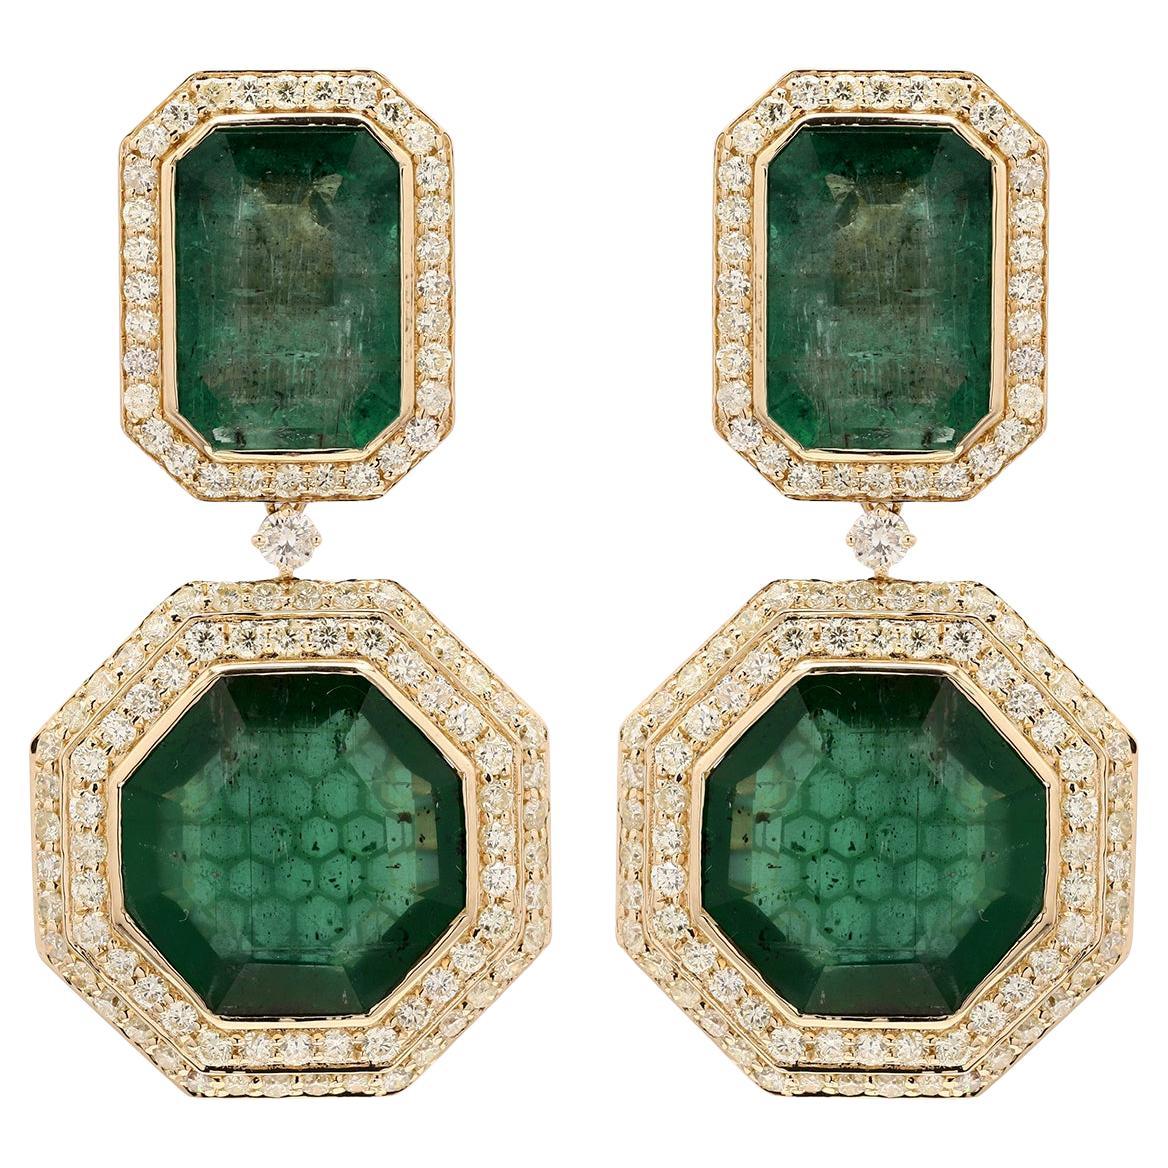 41.22 ct Two Tier Emerald Dangle Earrings With Diamonds Made in 18k Yellow Gold For Sale